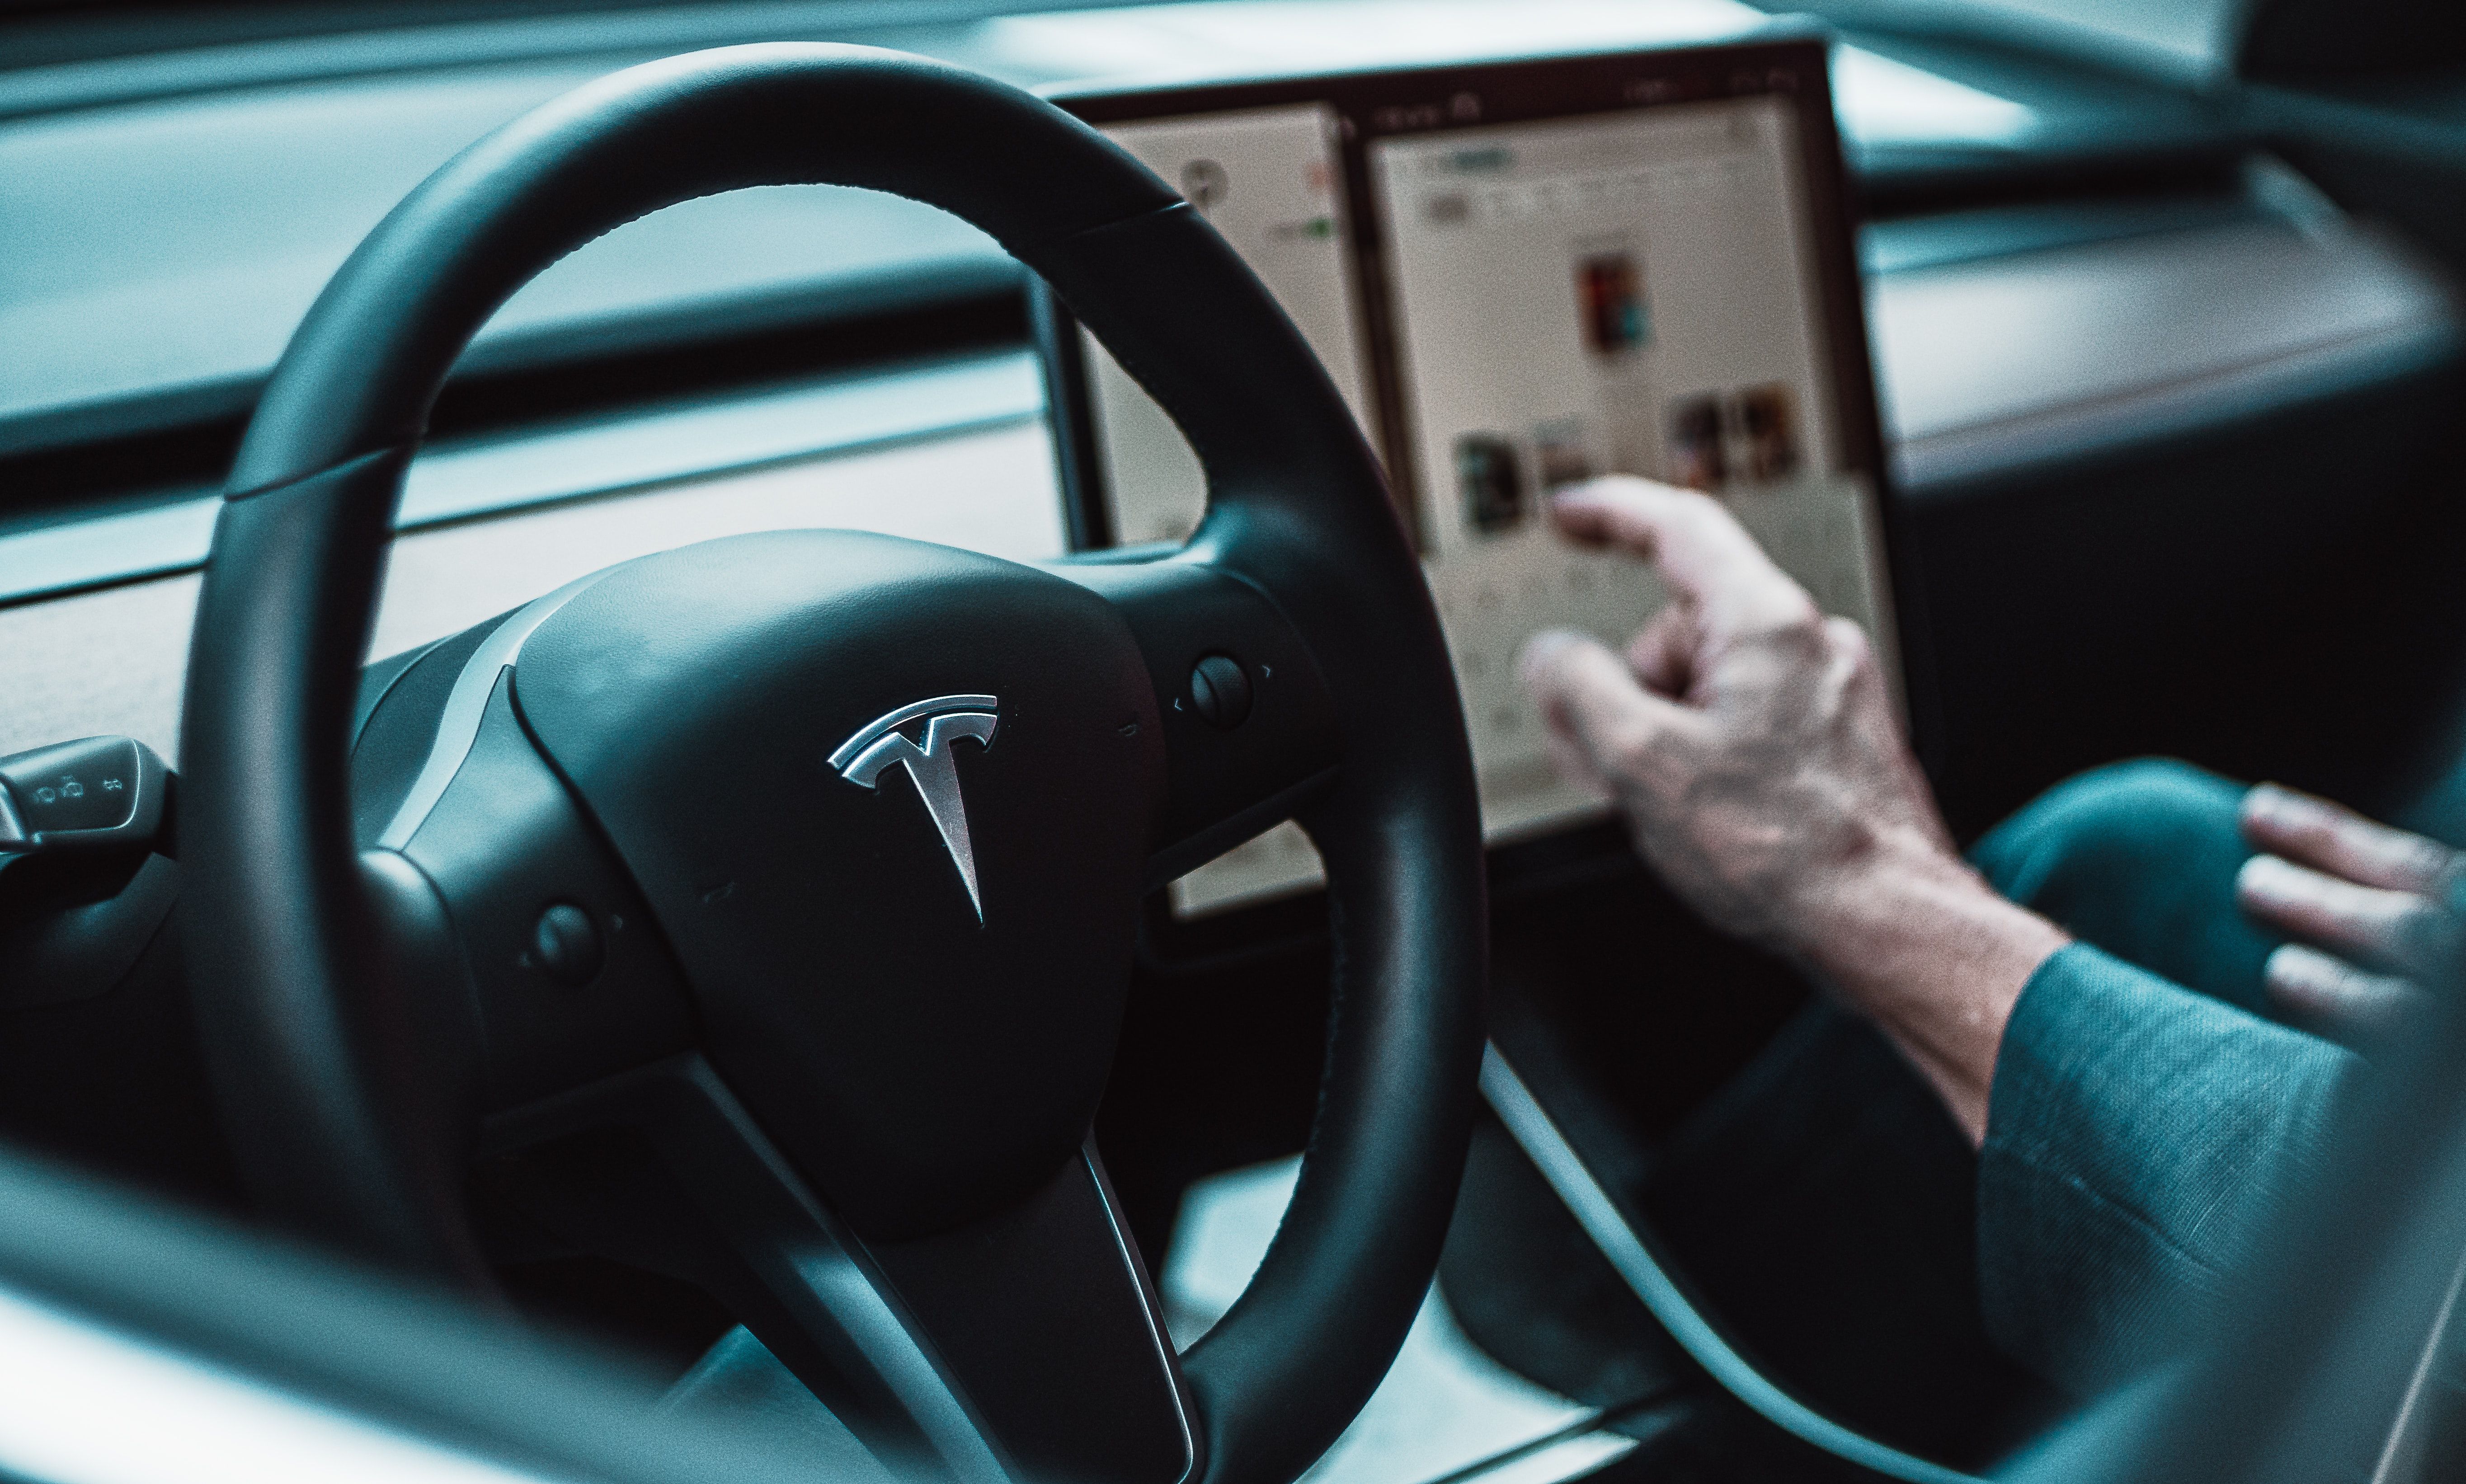 A person operating a Tesla vehicle.